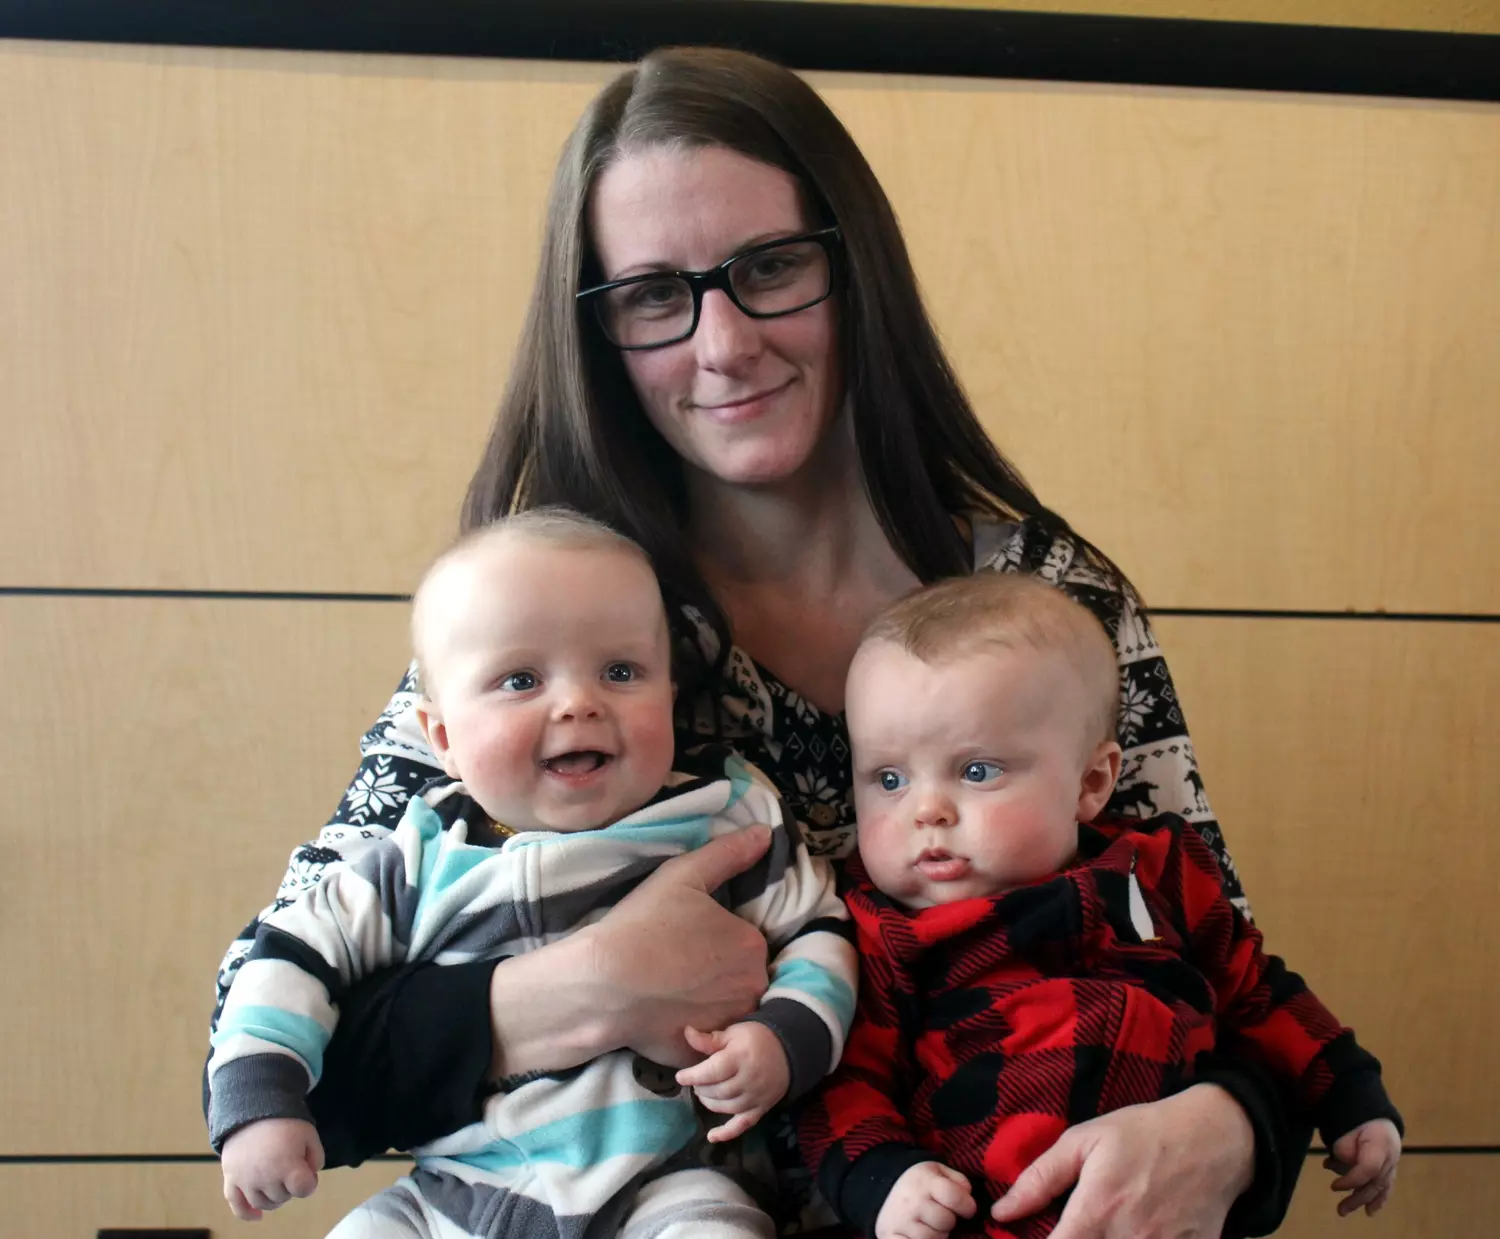 Twice-blessed this holiday season - Once considering abortion, woman now embraces motherhood with twins